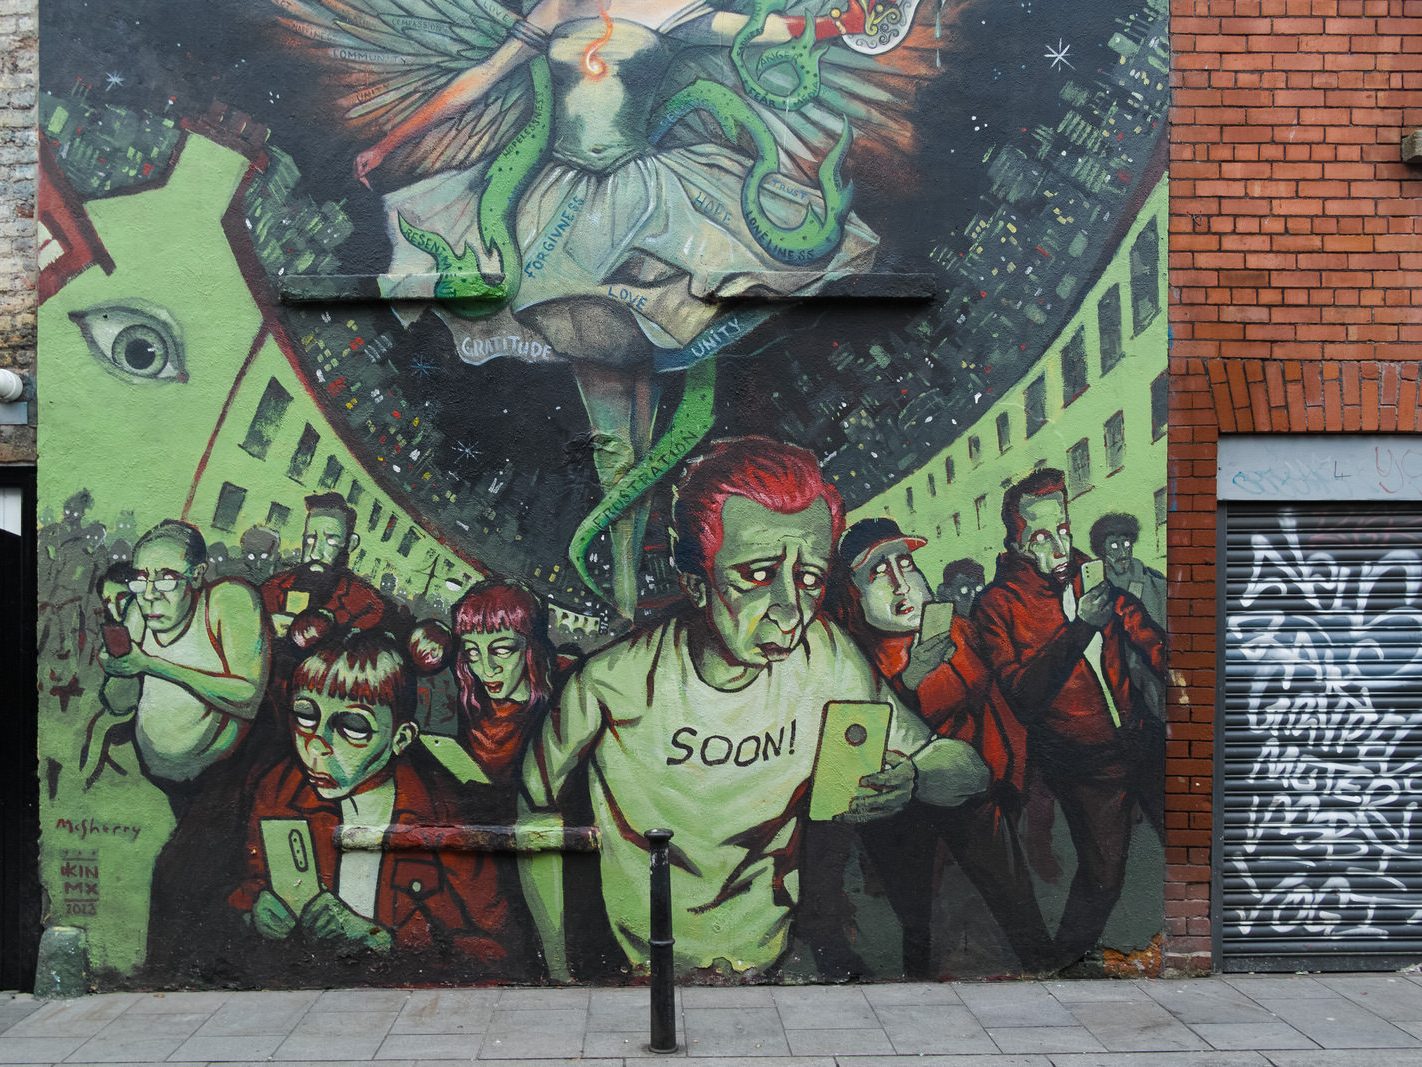 PHONE ZOMBIES IS A STREET ART MURAL WITH A MESSAGE [LOCATED ON CAMDEN ROW]-226217-1